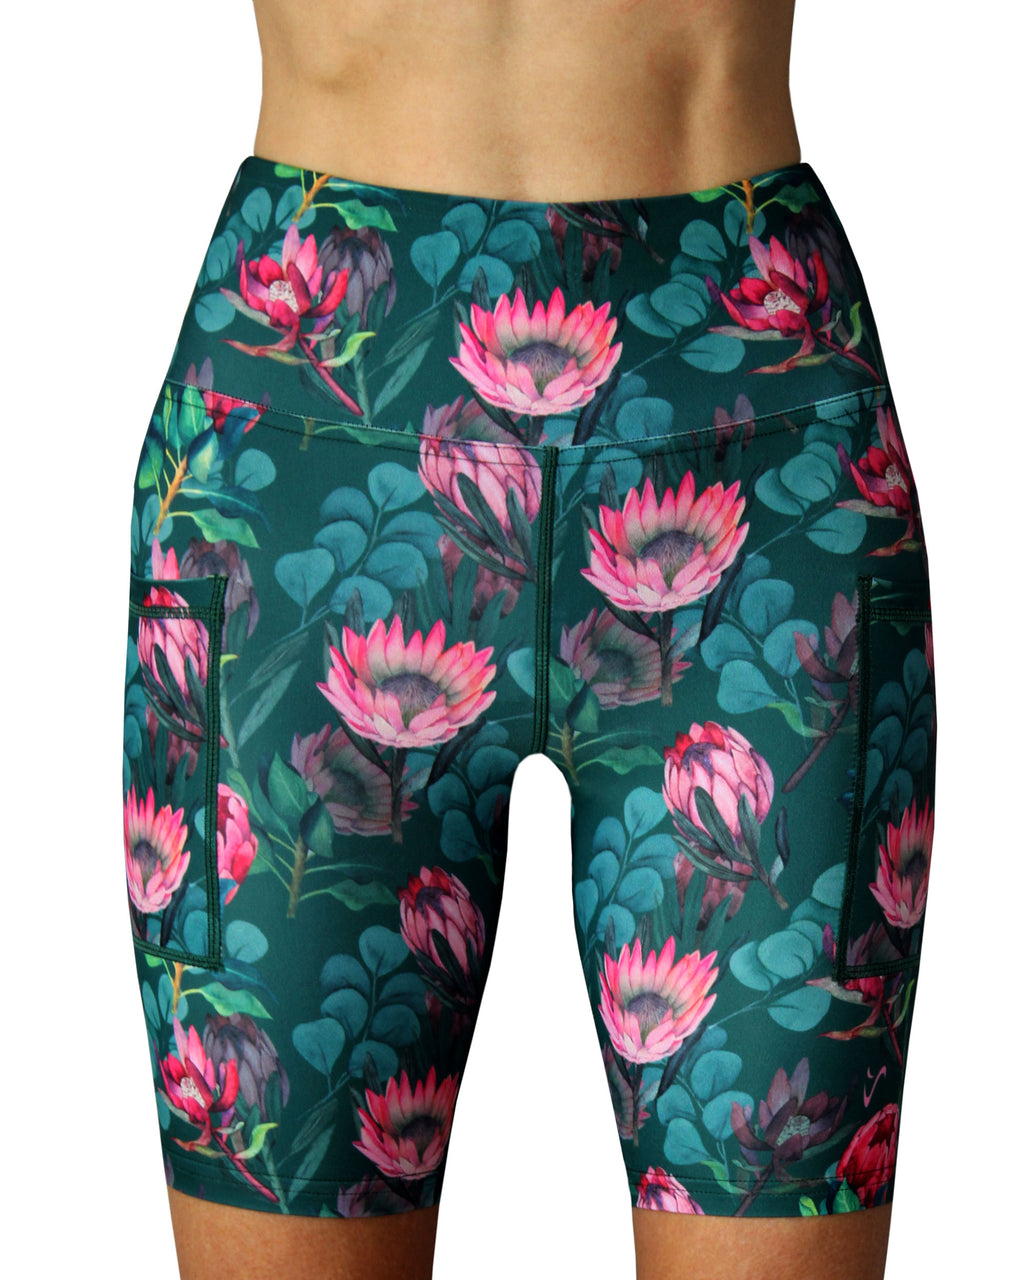 Funky Women's Protea running and gym shorts. Made in Cape Town, South Africa.